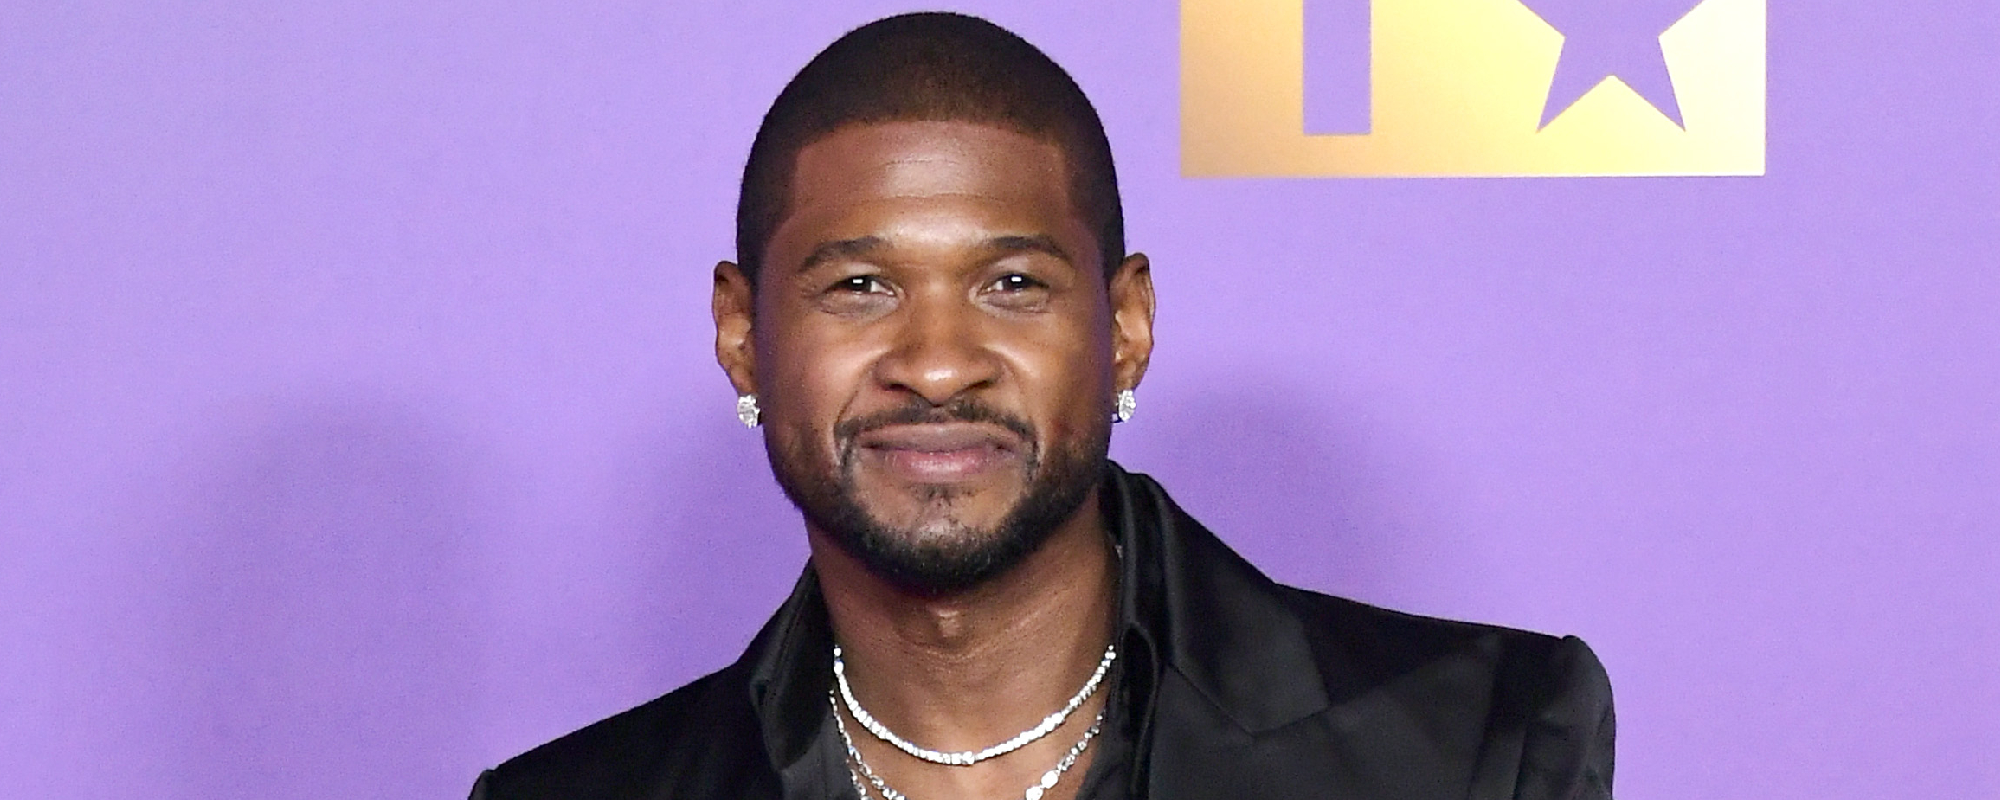 Usher Recalls Living With Sean “Diddy” Combs When He Was 14: “It Was Pretty Wild”